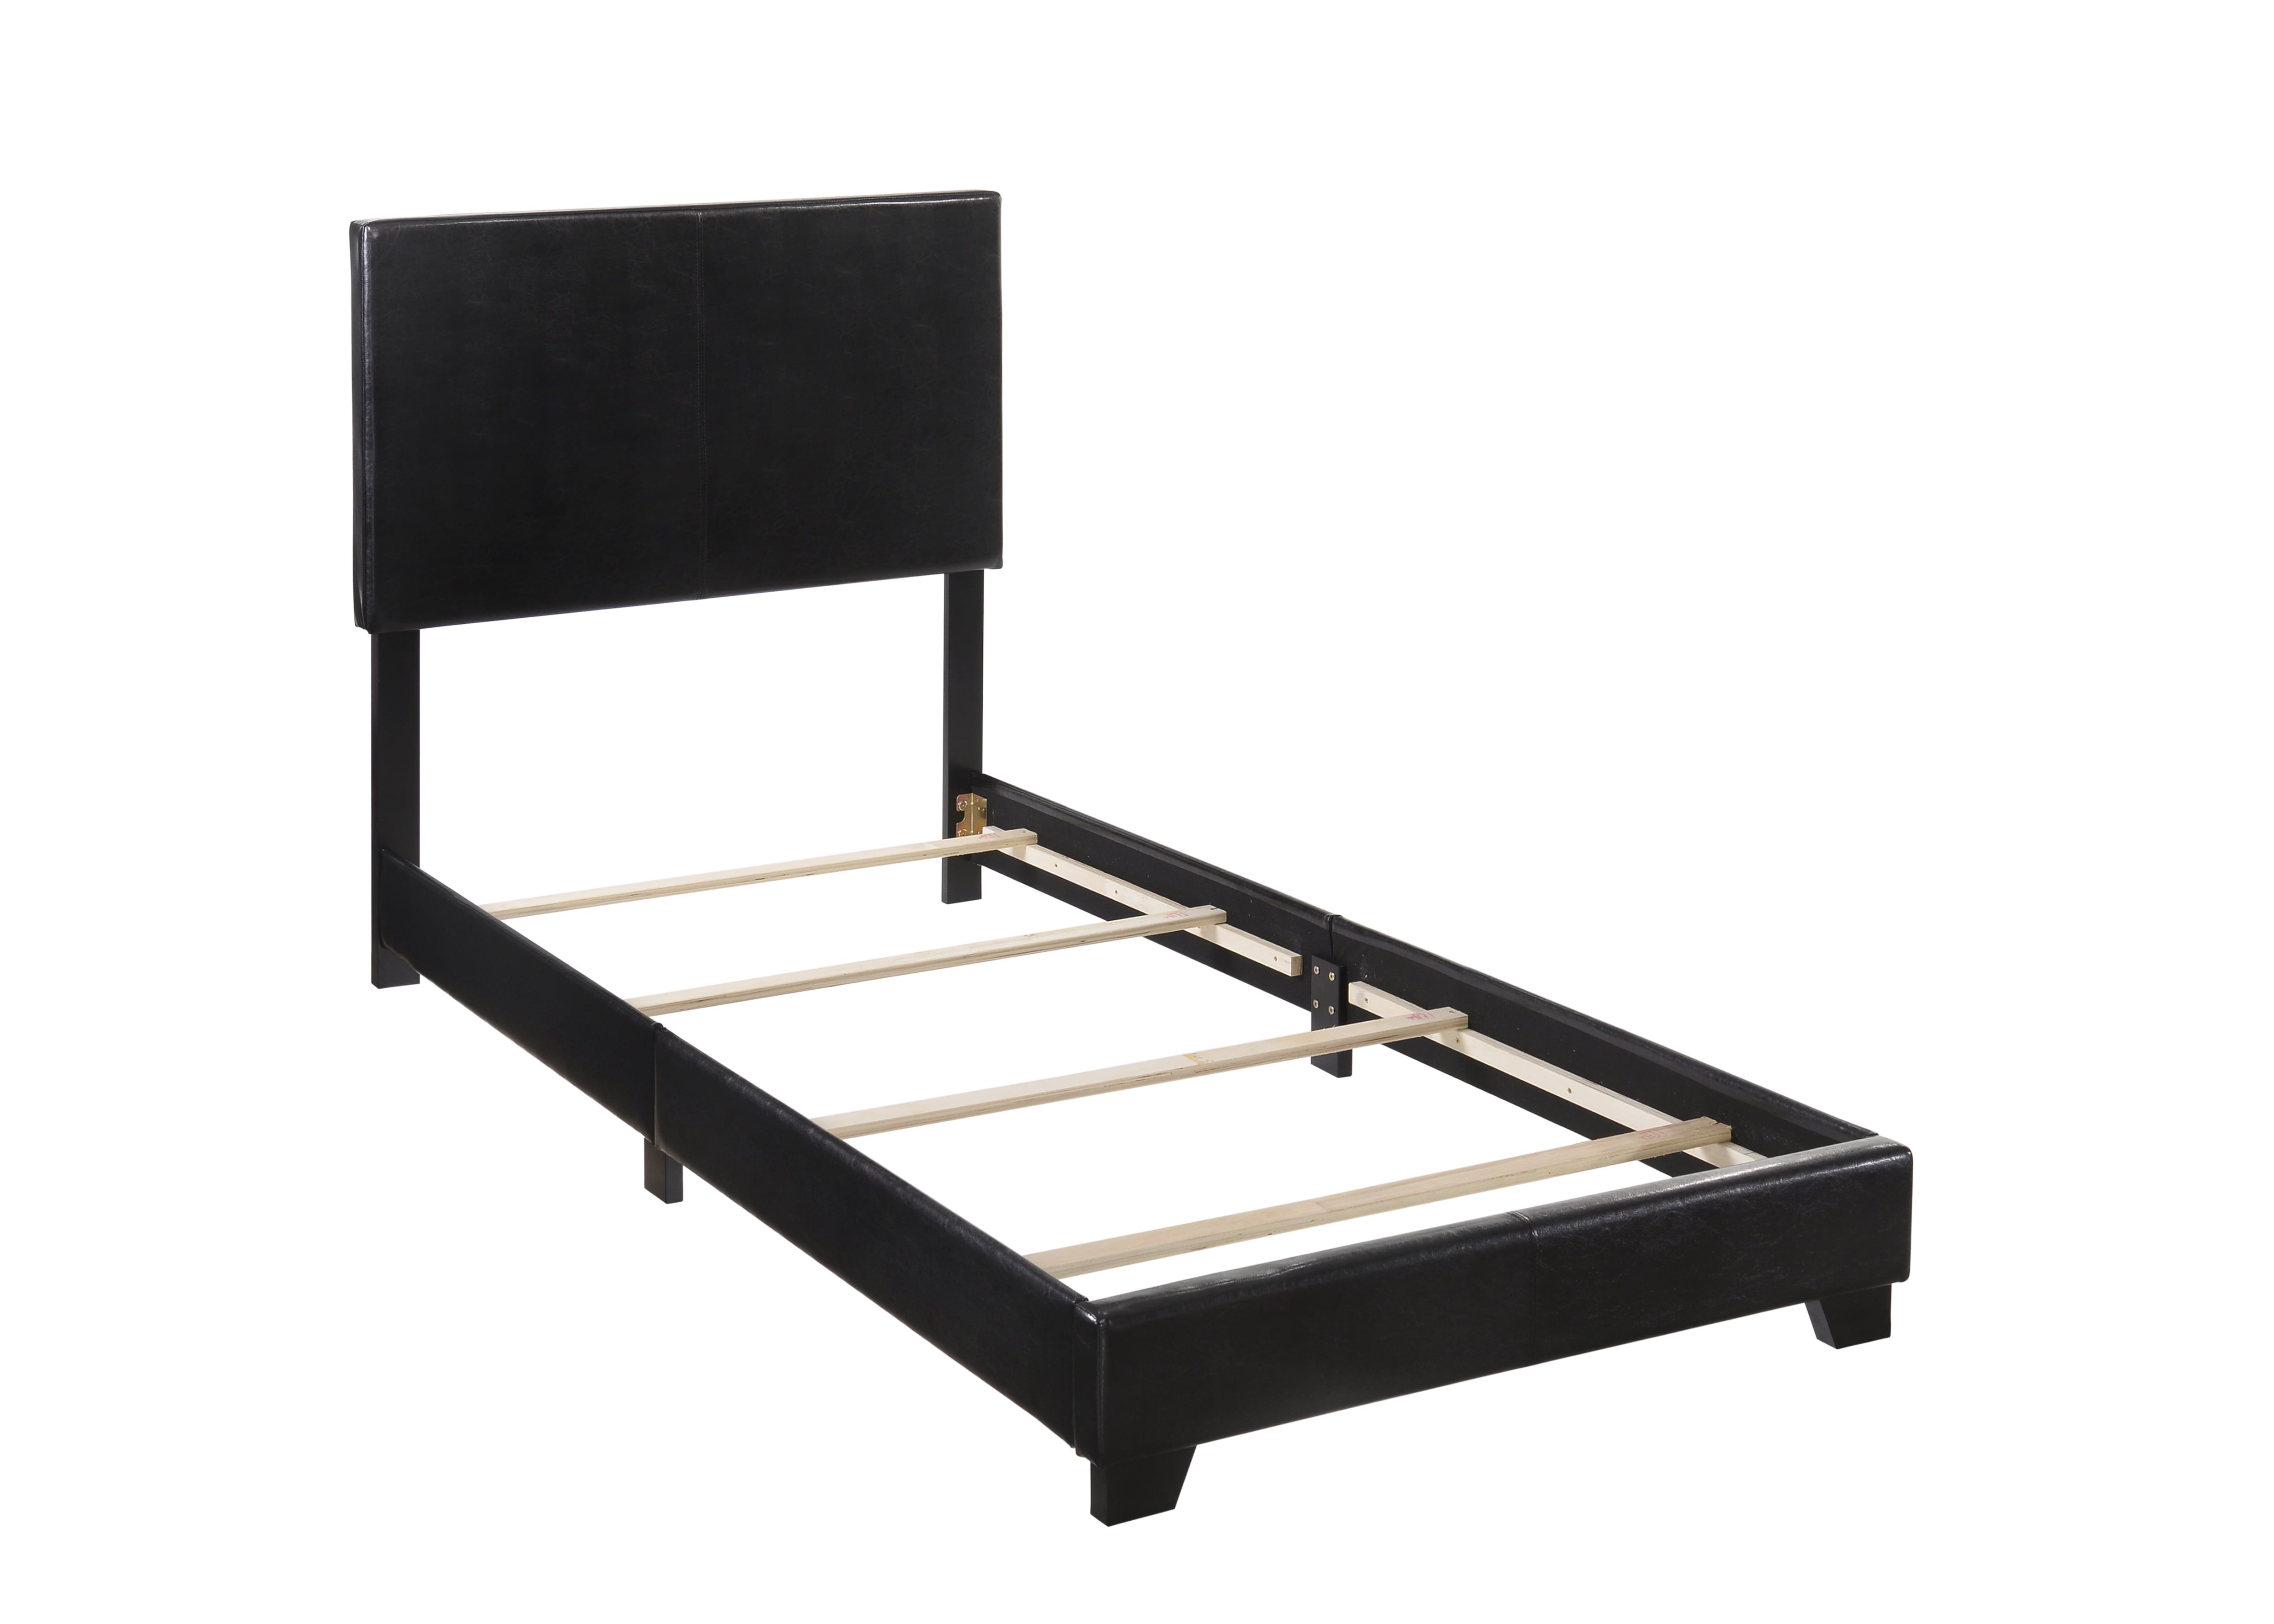 Crown Mark 5270GY-Q Bedroom Florence Queen Hbfbside Rail Panel Bed for sale online 